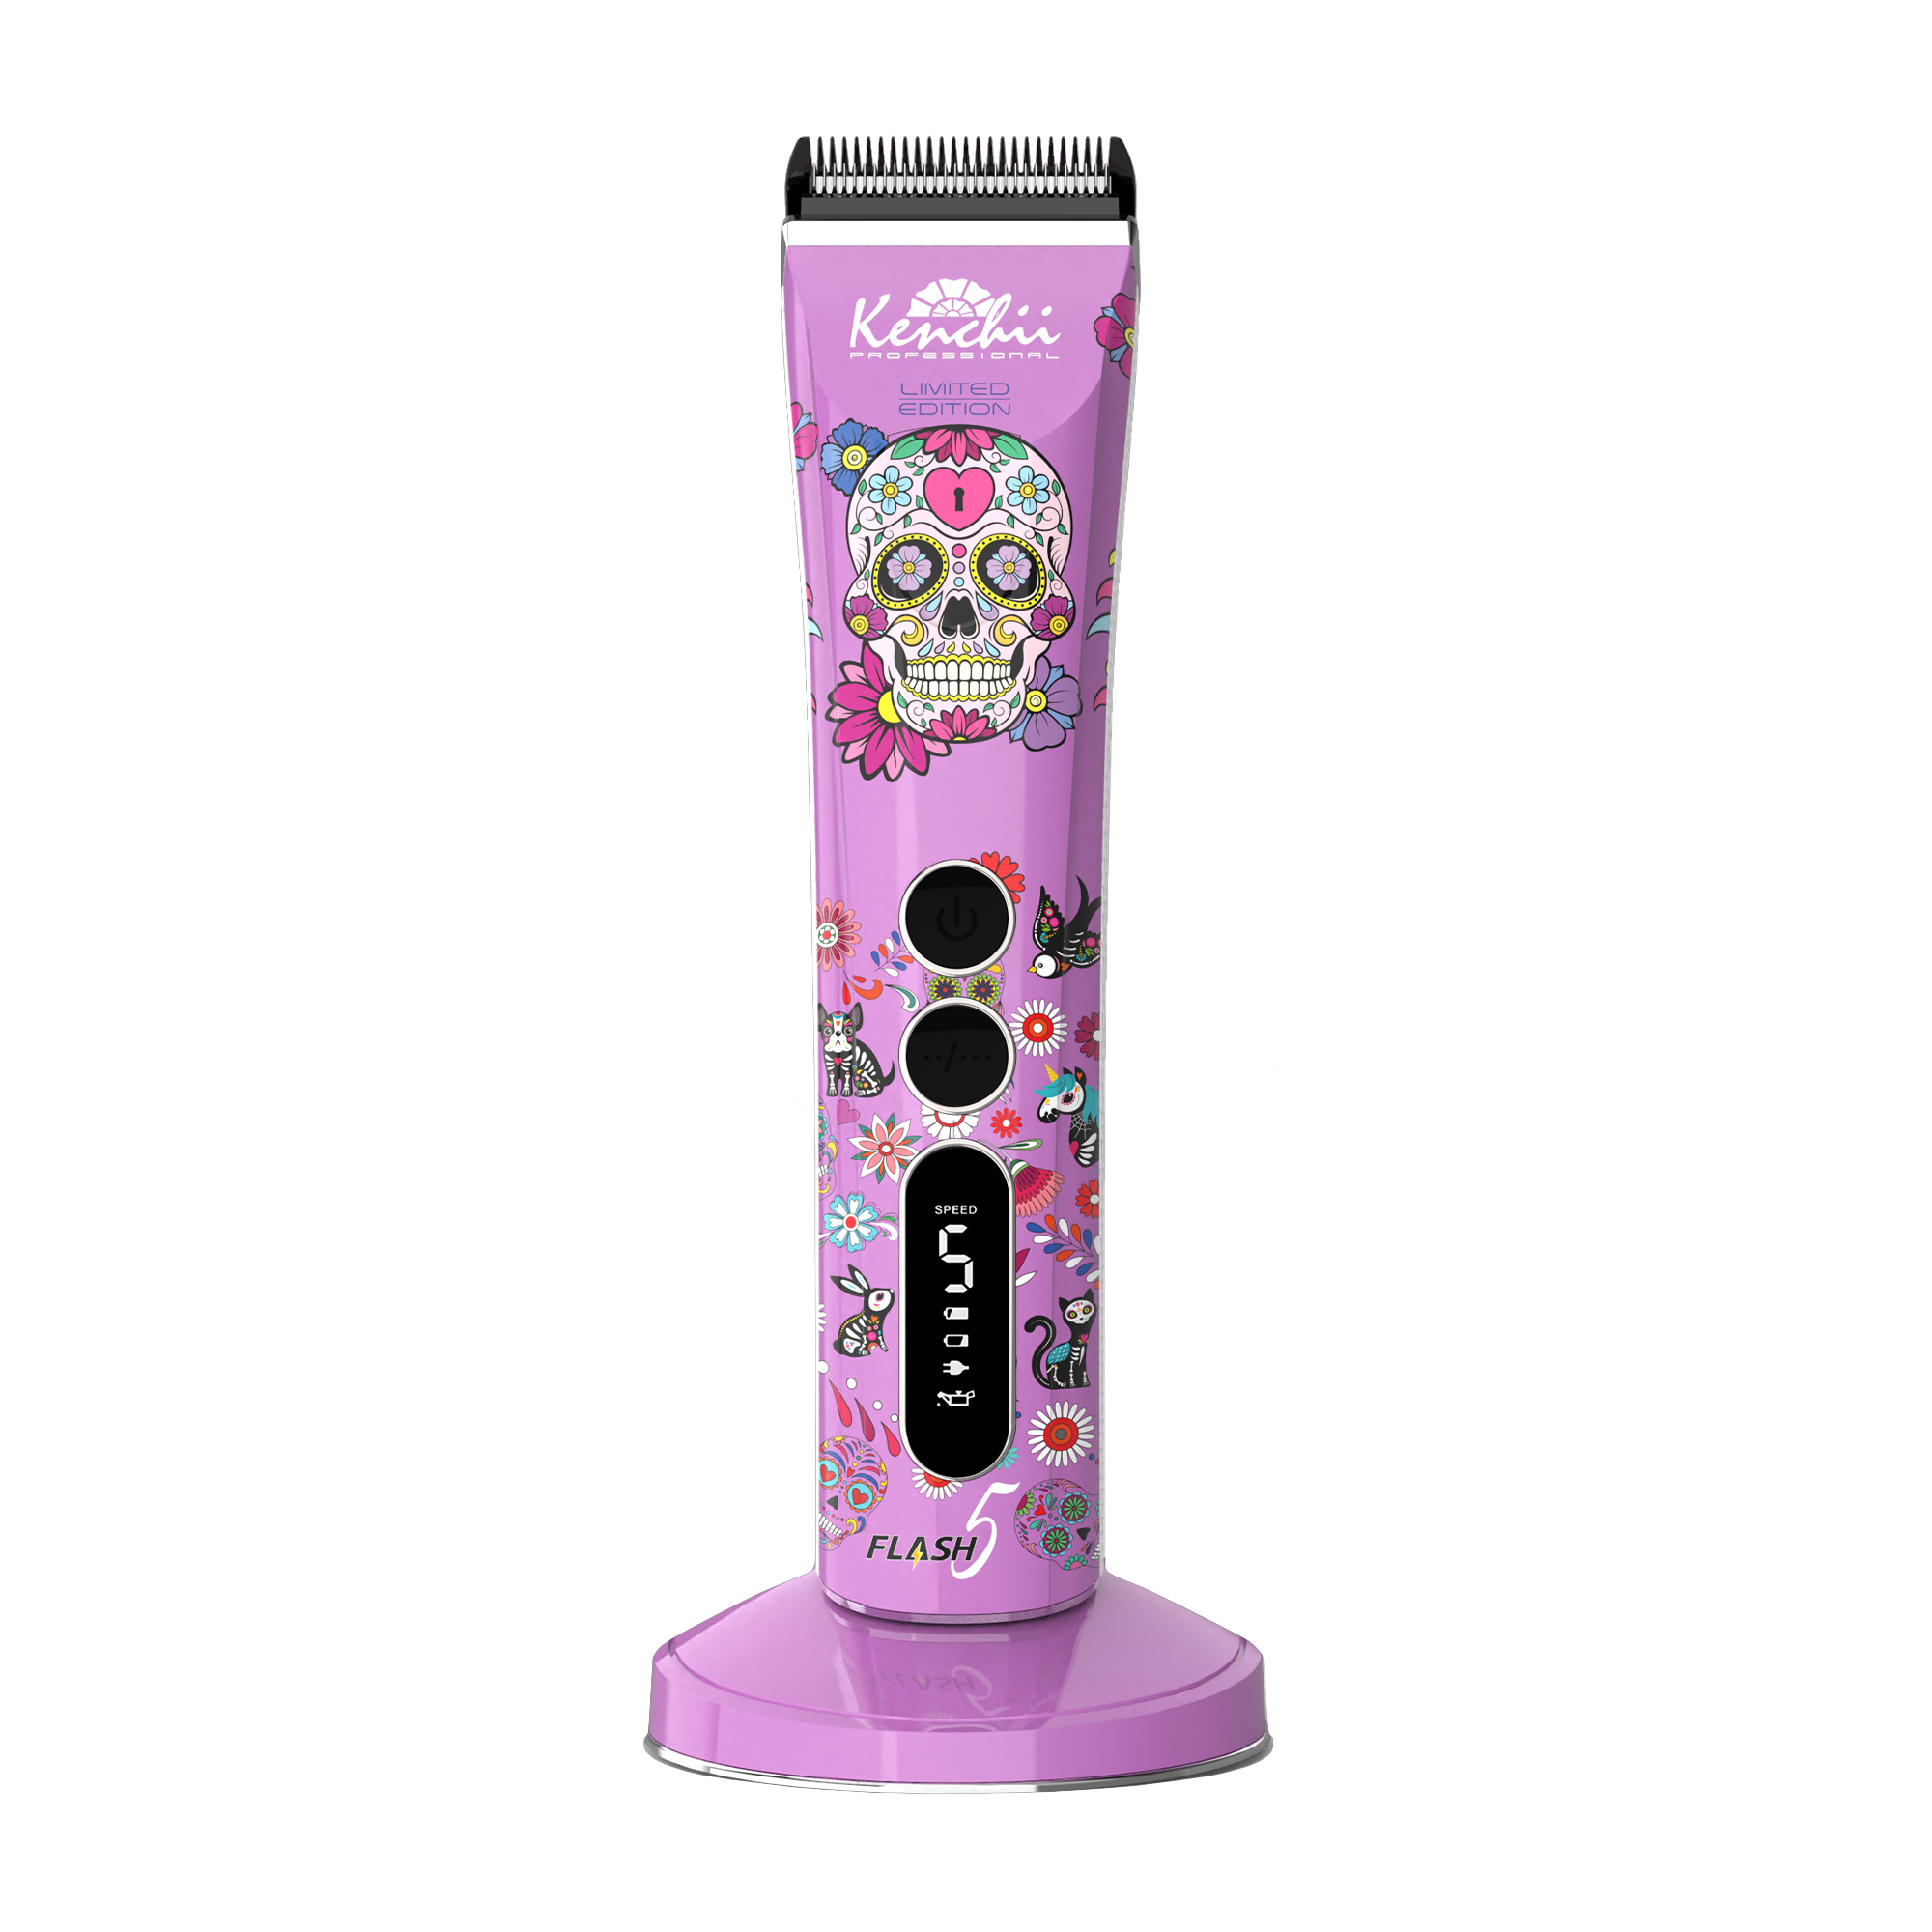 kenchii flash5 5in1 purple skull clipper for dog grooming